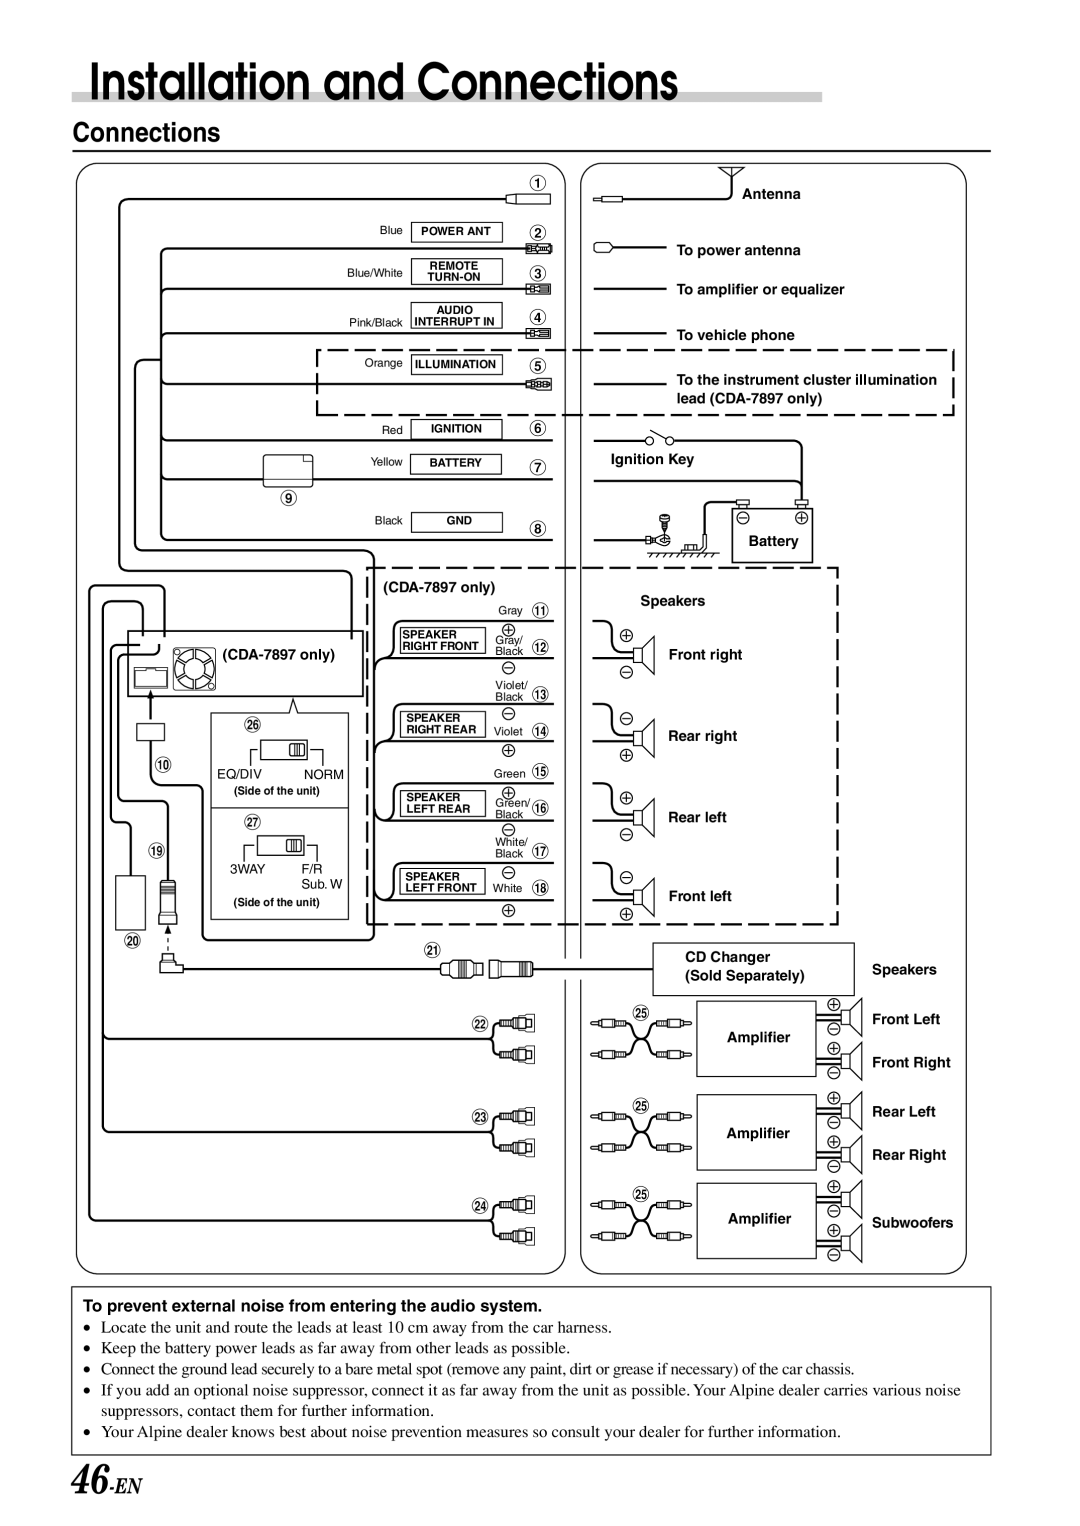 Alpine CDA-7998 owner manual 46-EN, Installation and Connections 